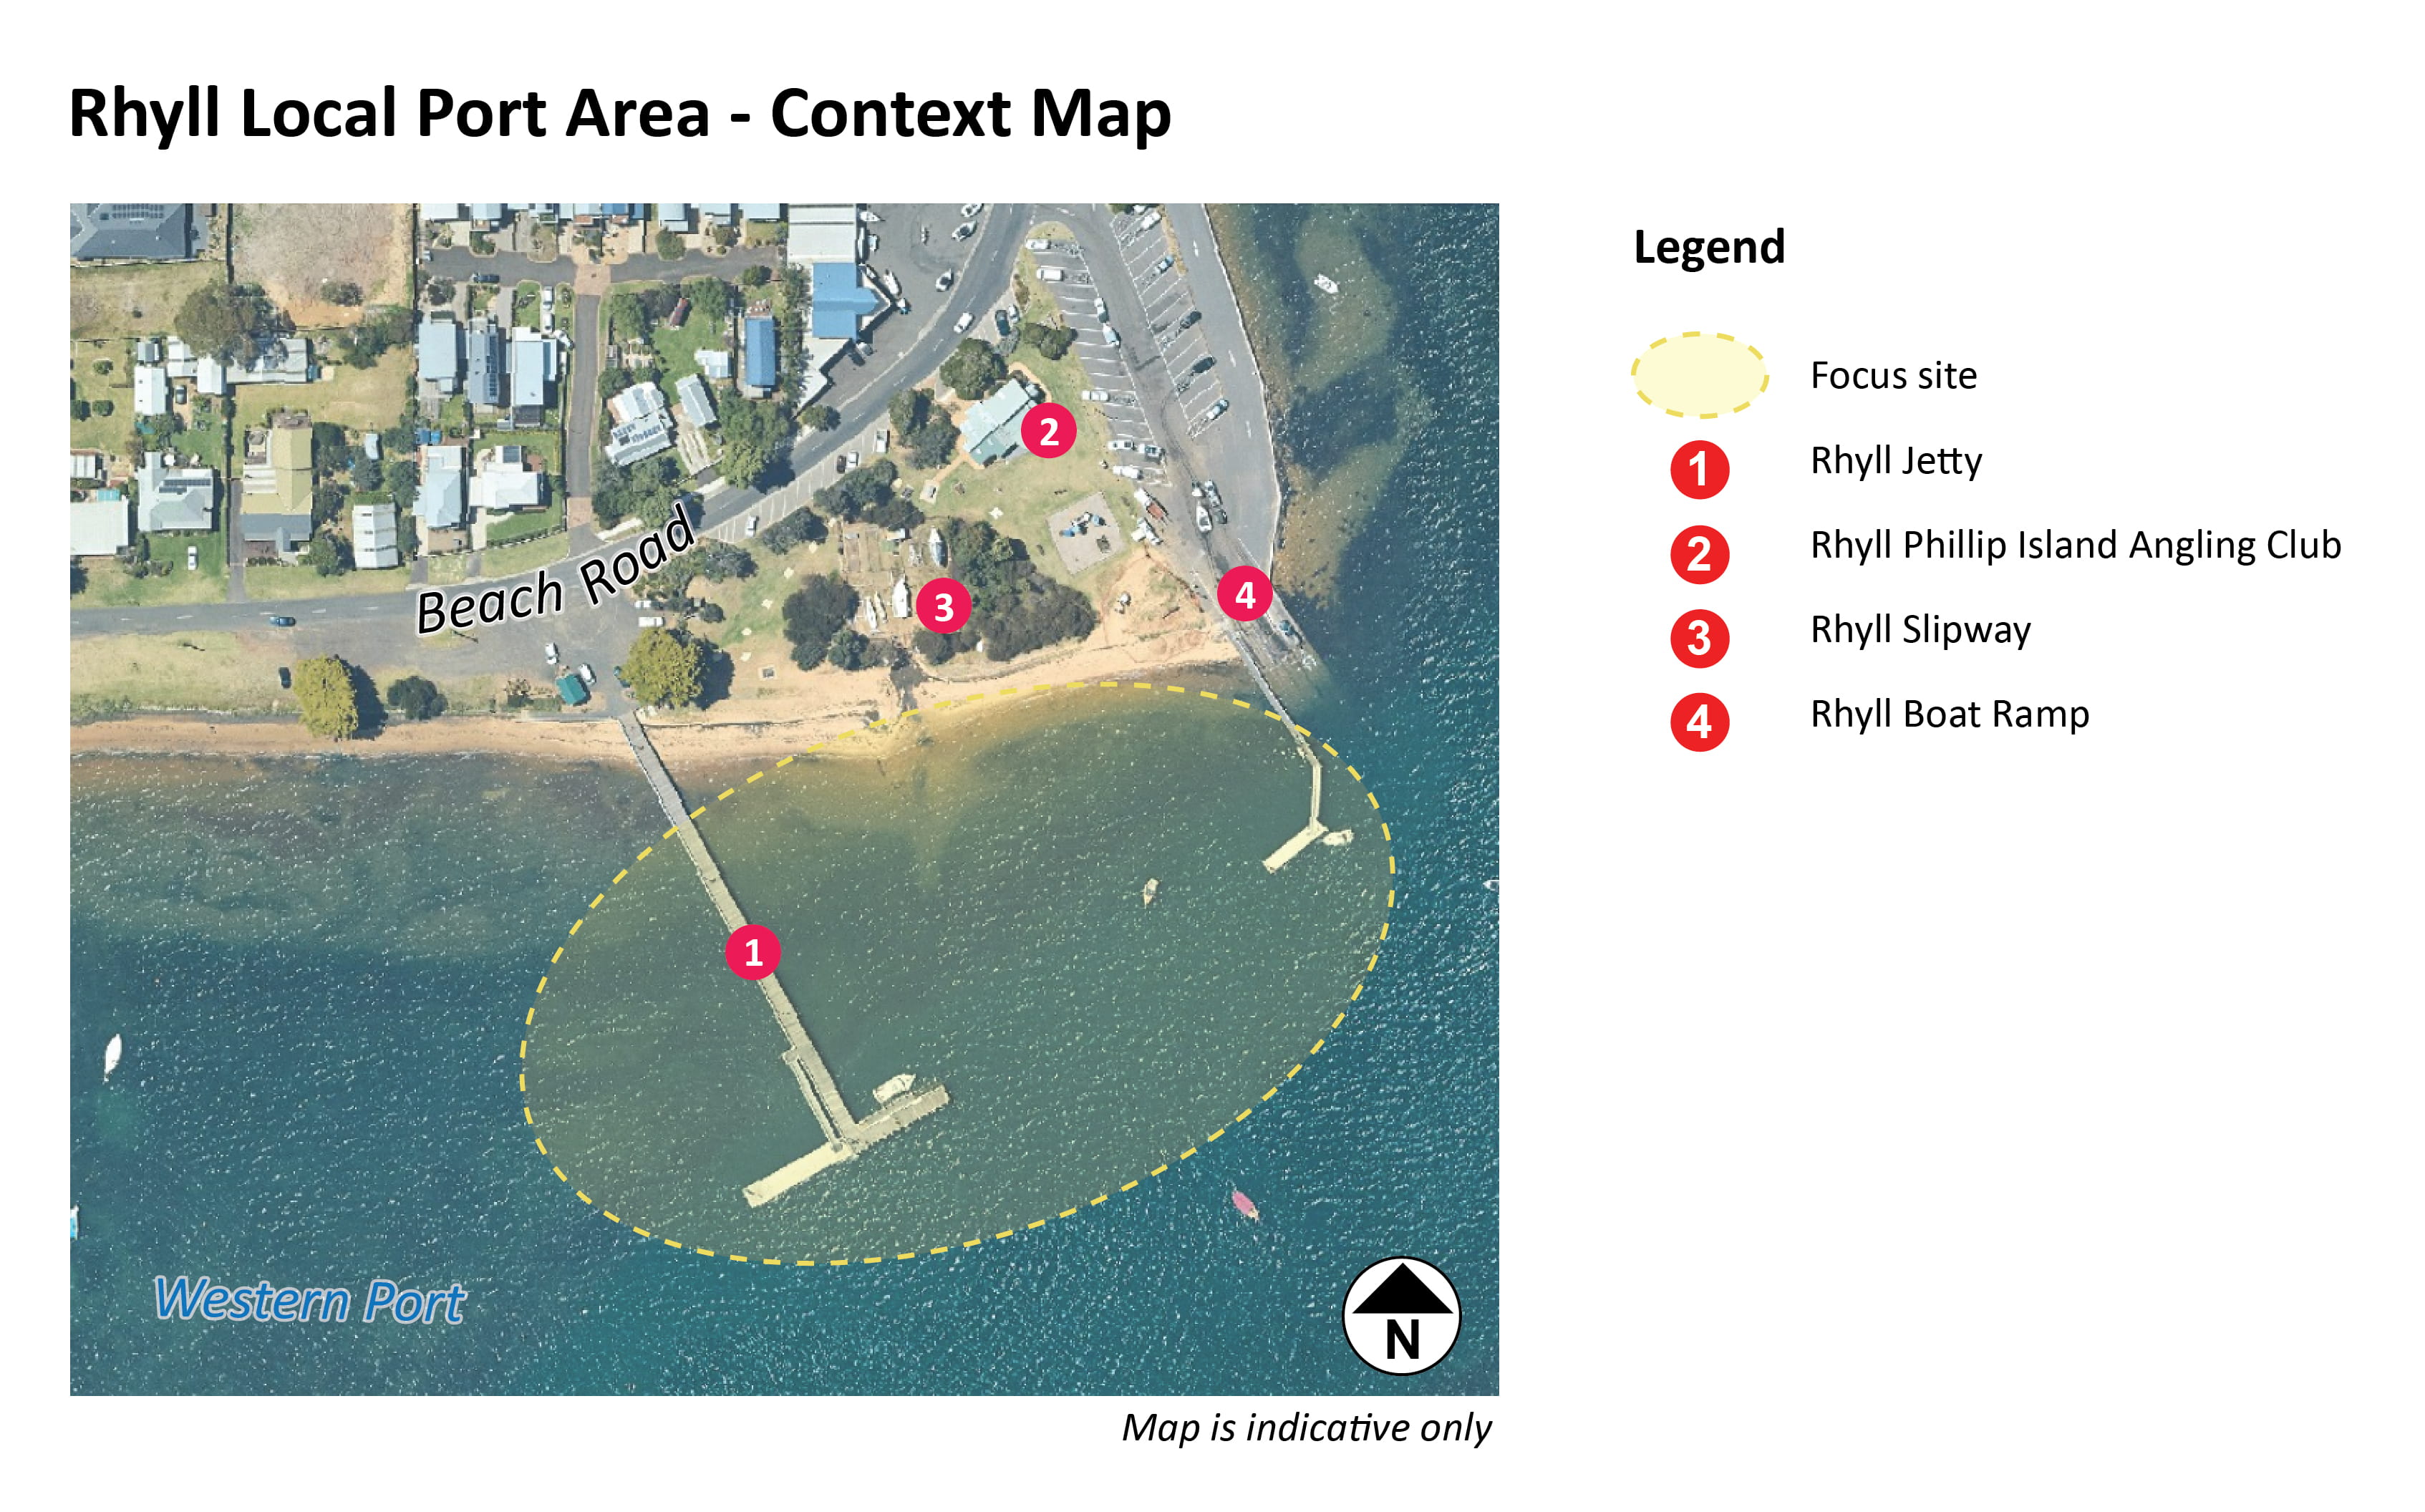 Rhyll Project context map